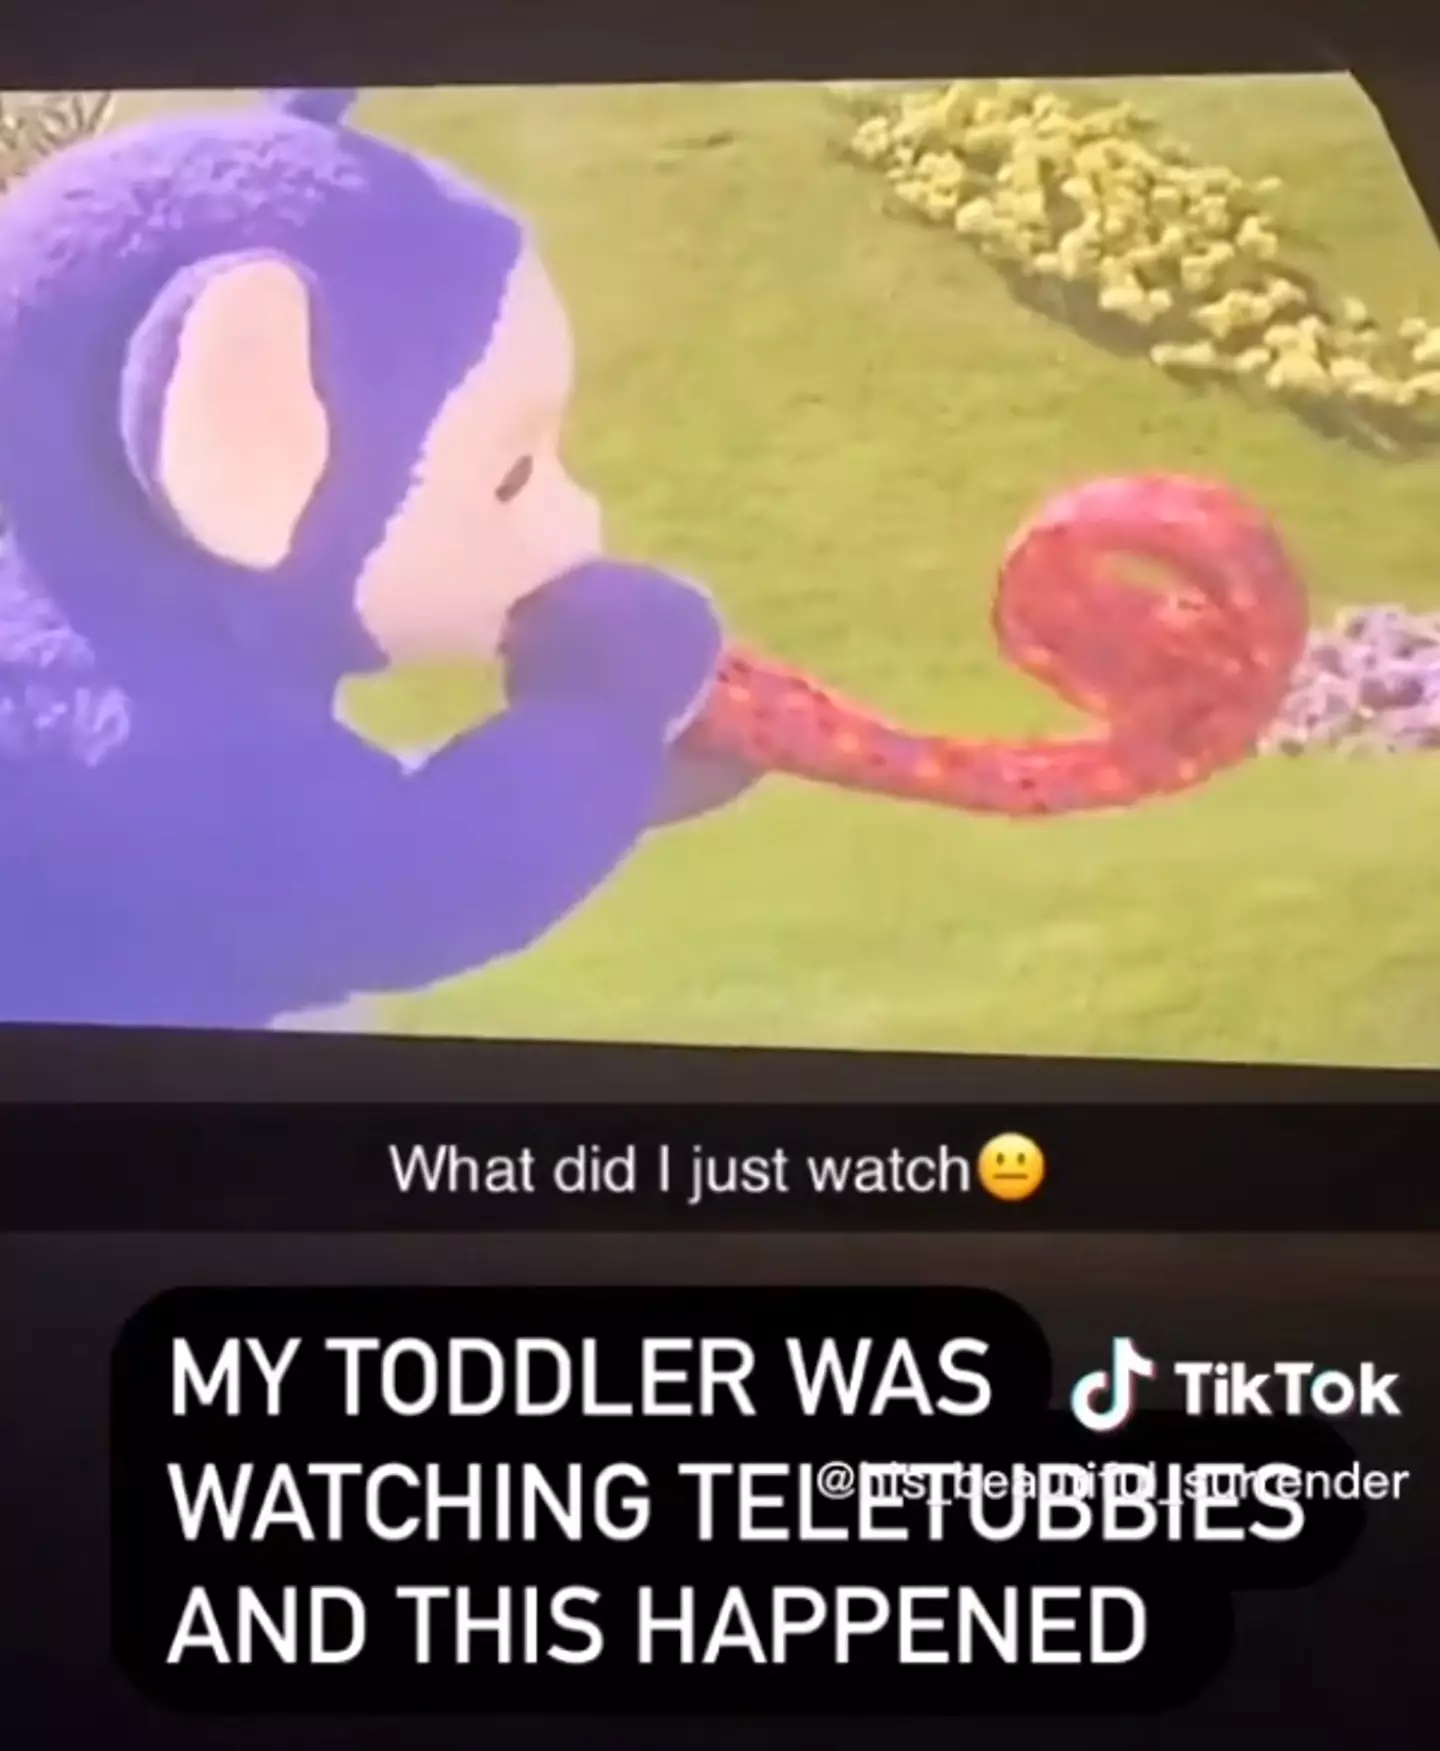 The Teletubbies have been baffling parents for decades.